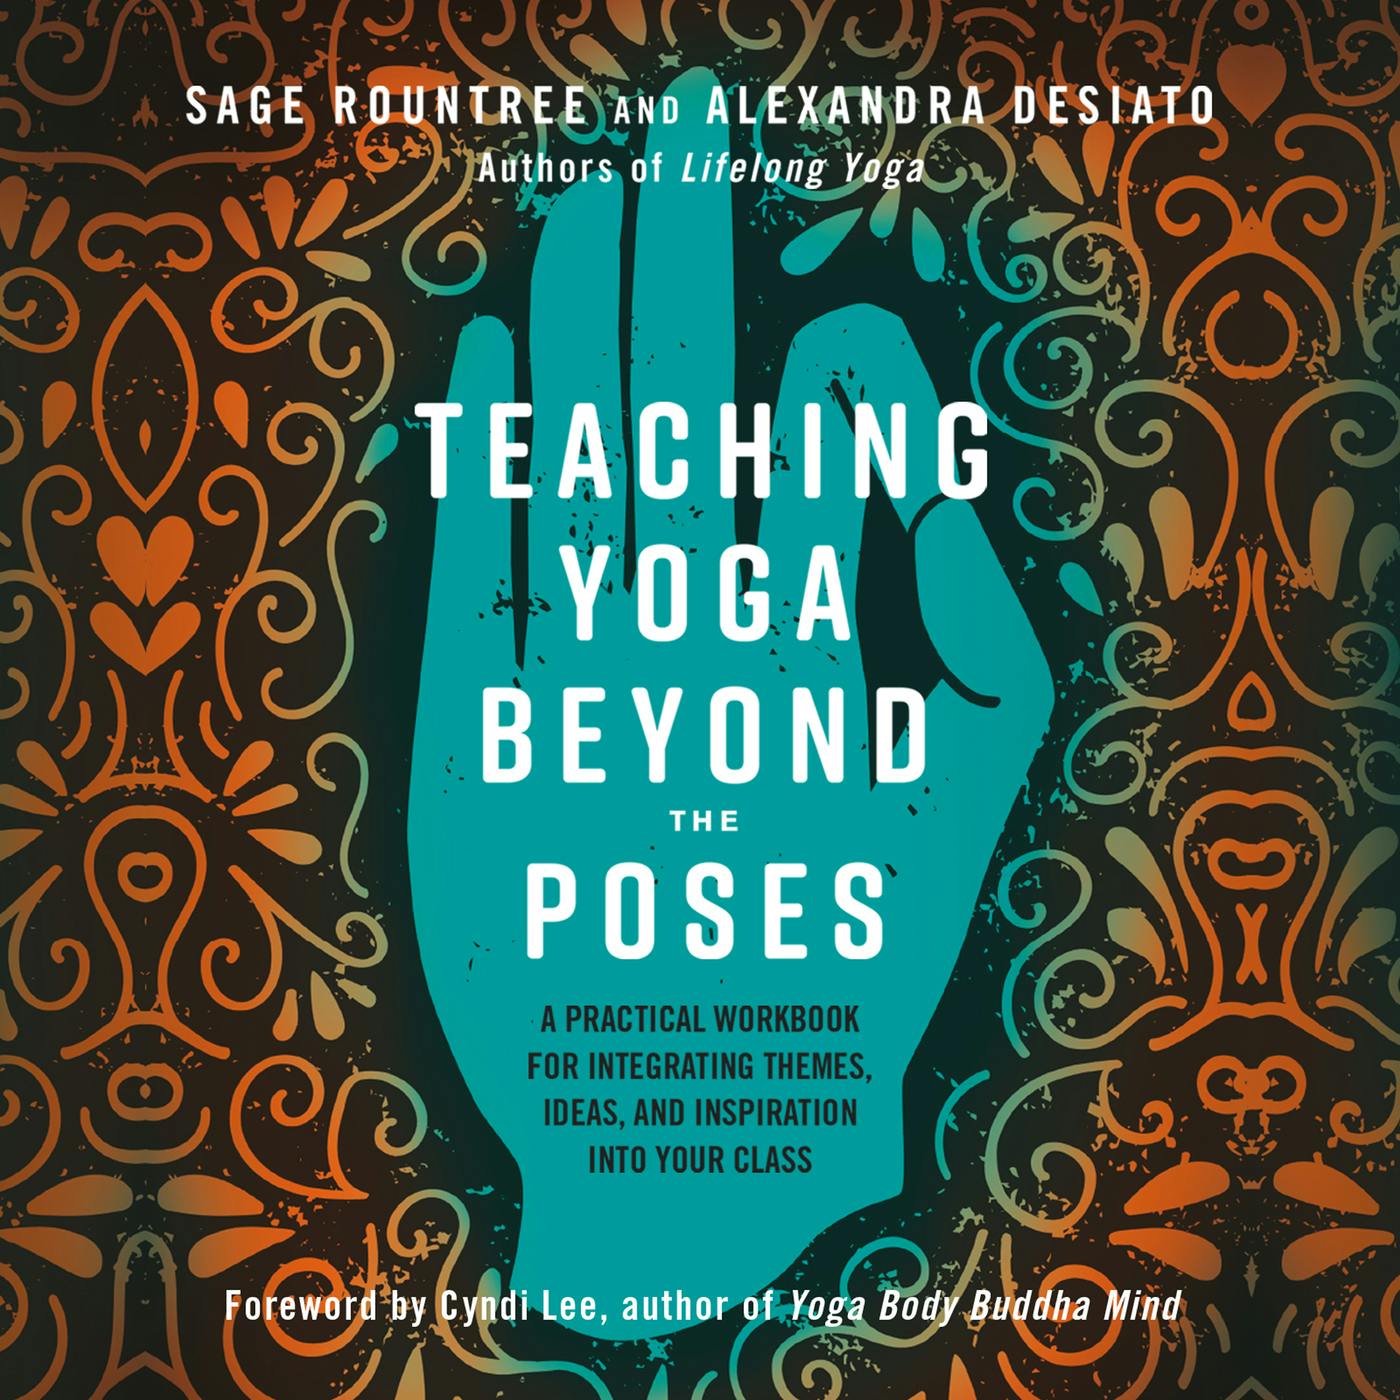 Teaching Yoga Beyond the Poses - A Practical Workbook for Integrating Themes, Ideas, and Inspiration into Your Class (Unabridged) - Alexandra Desiato, Sage Rountree